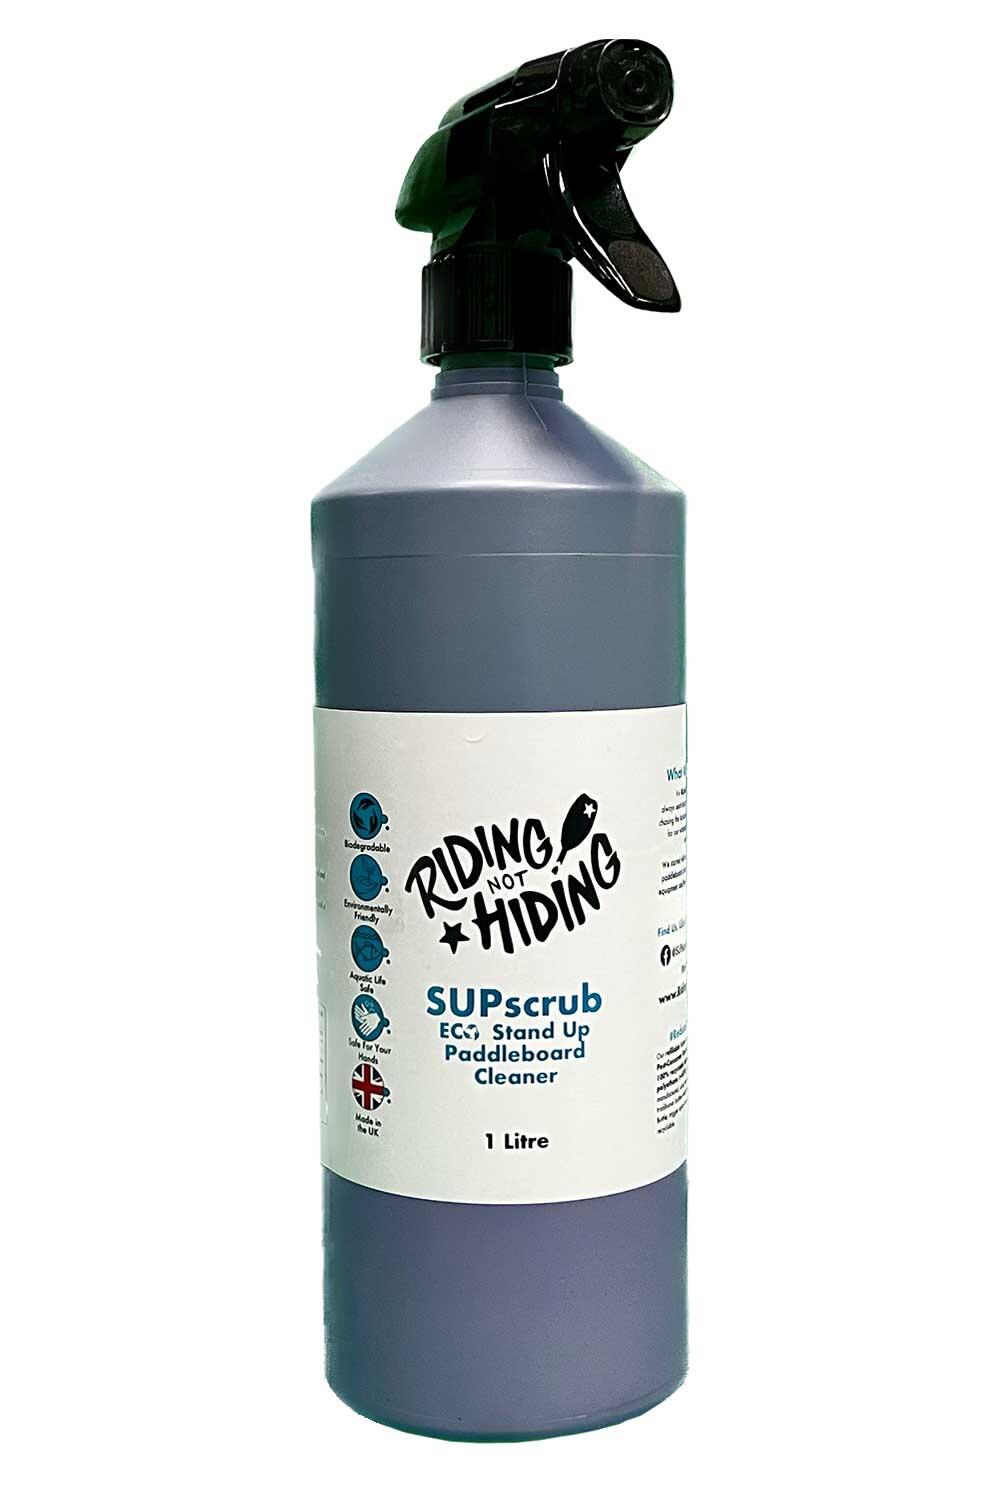 RIDING NOT HIDING SUP SCRUB - THE ECO PADDLEBOARD CLEANER